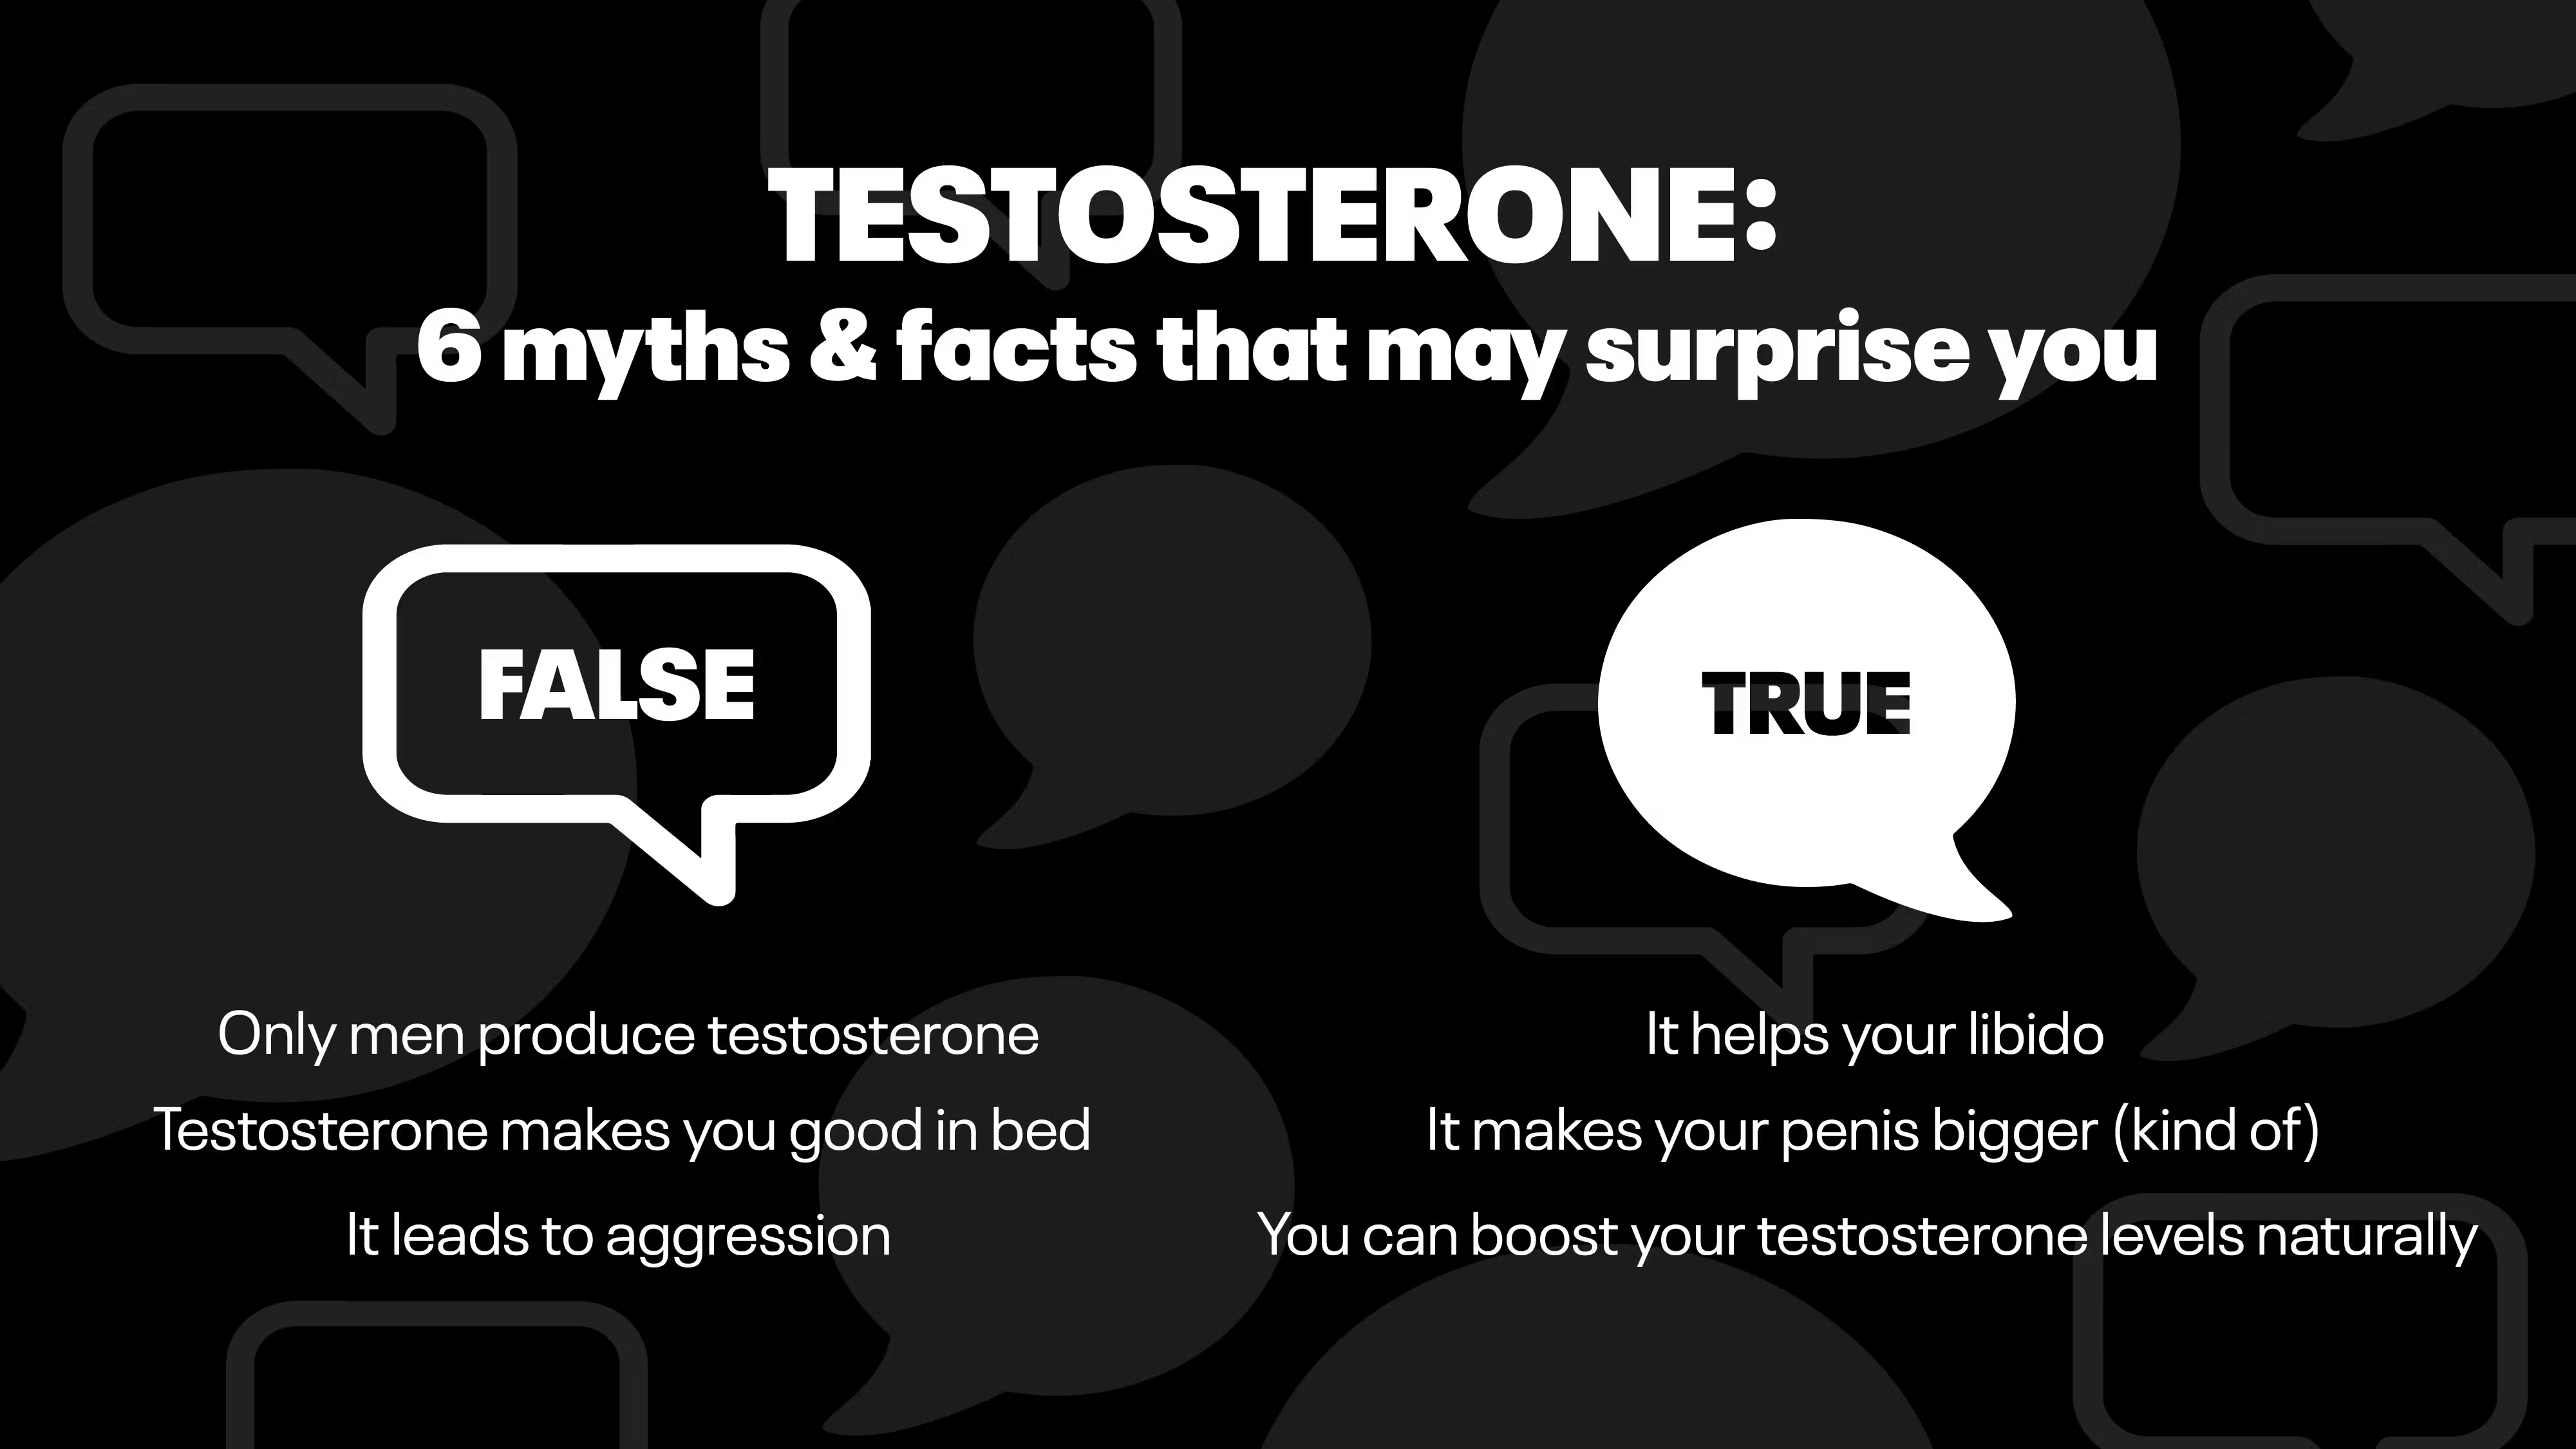 Testosterone myths and facts